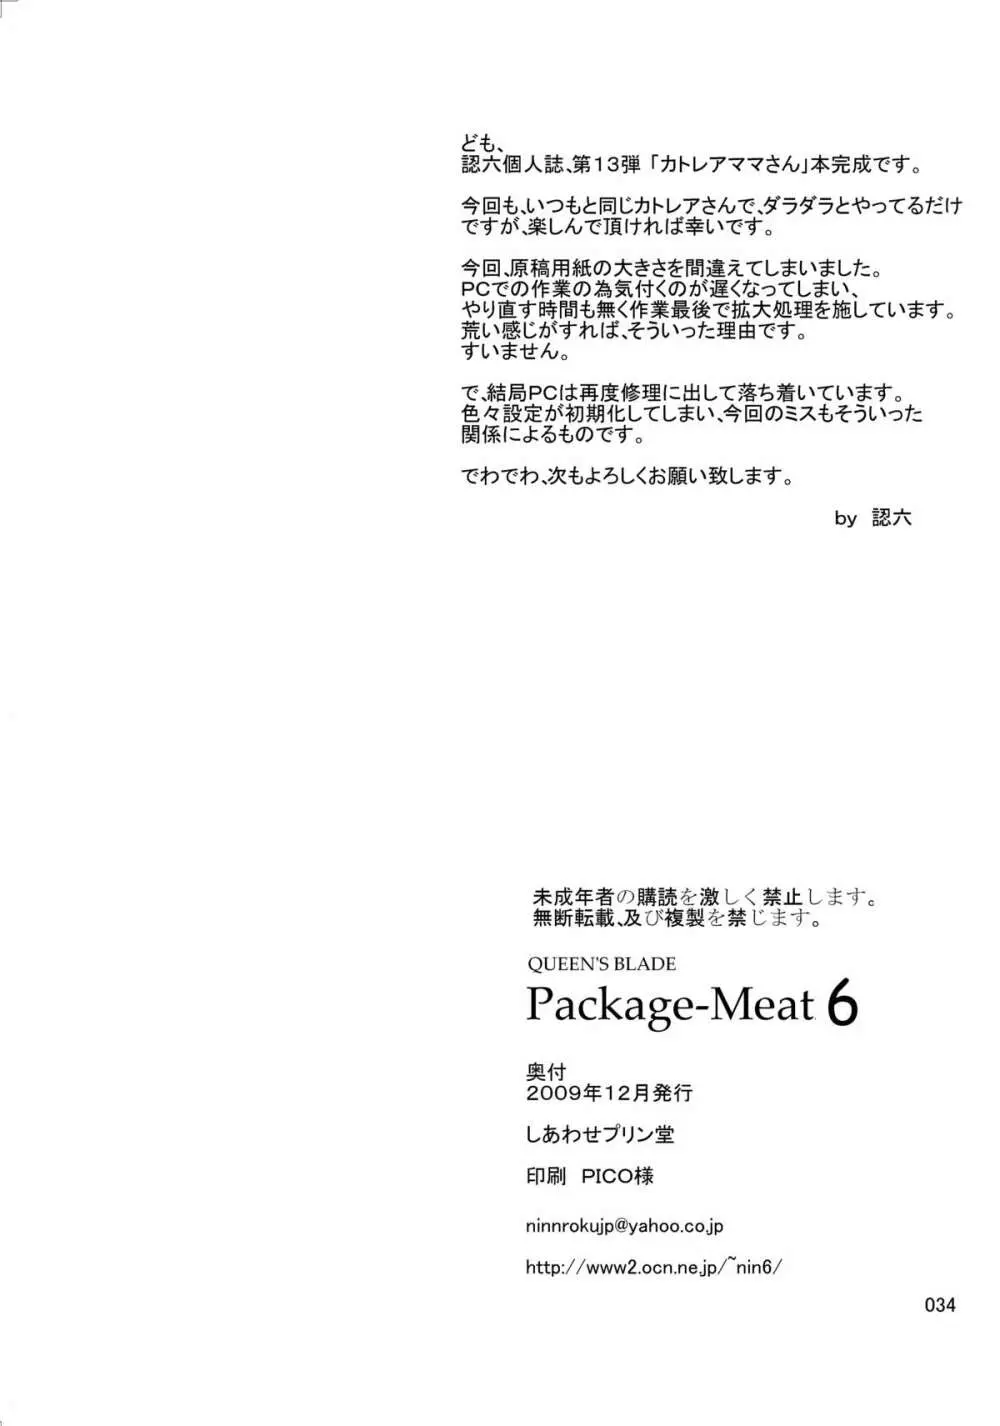 Package-Meat 6 34ページ